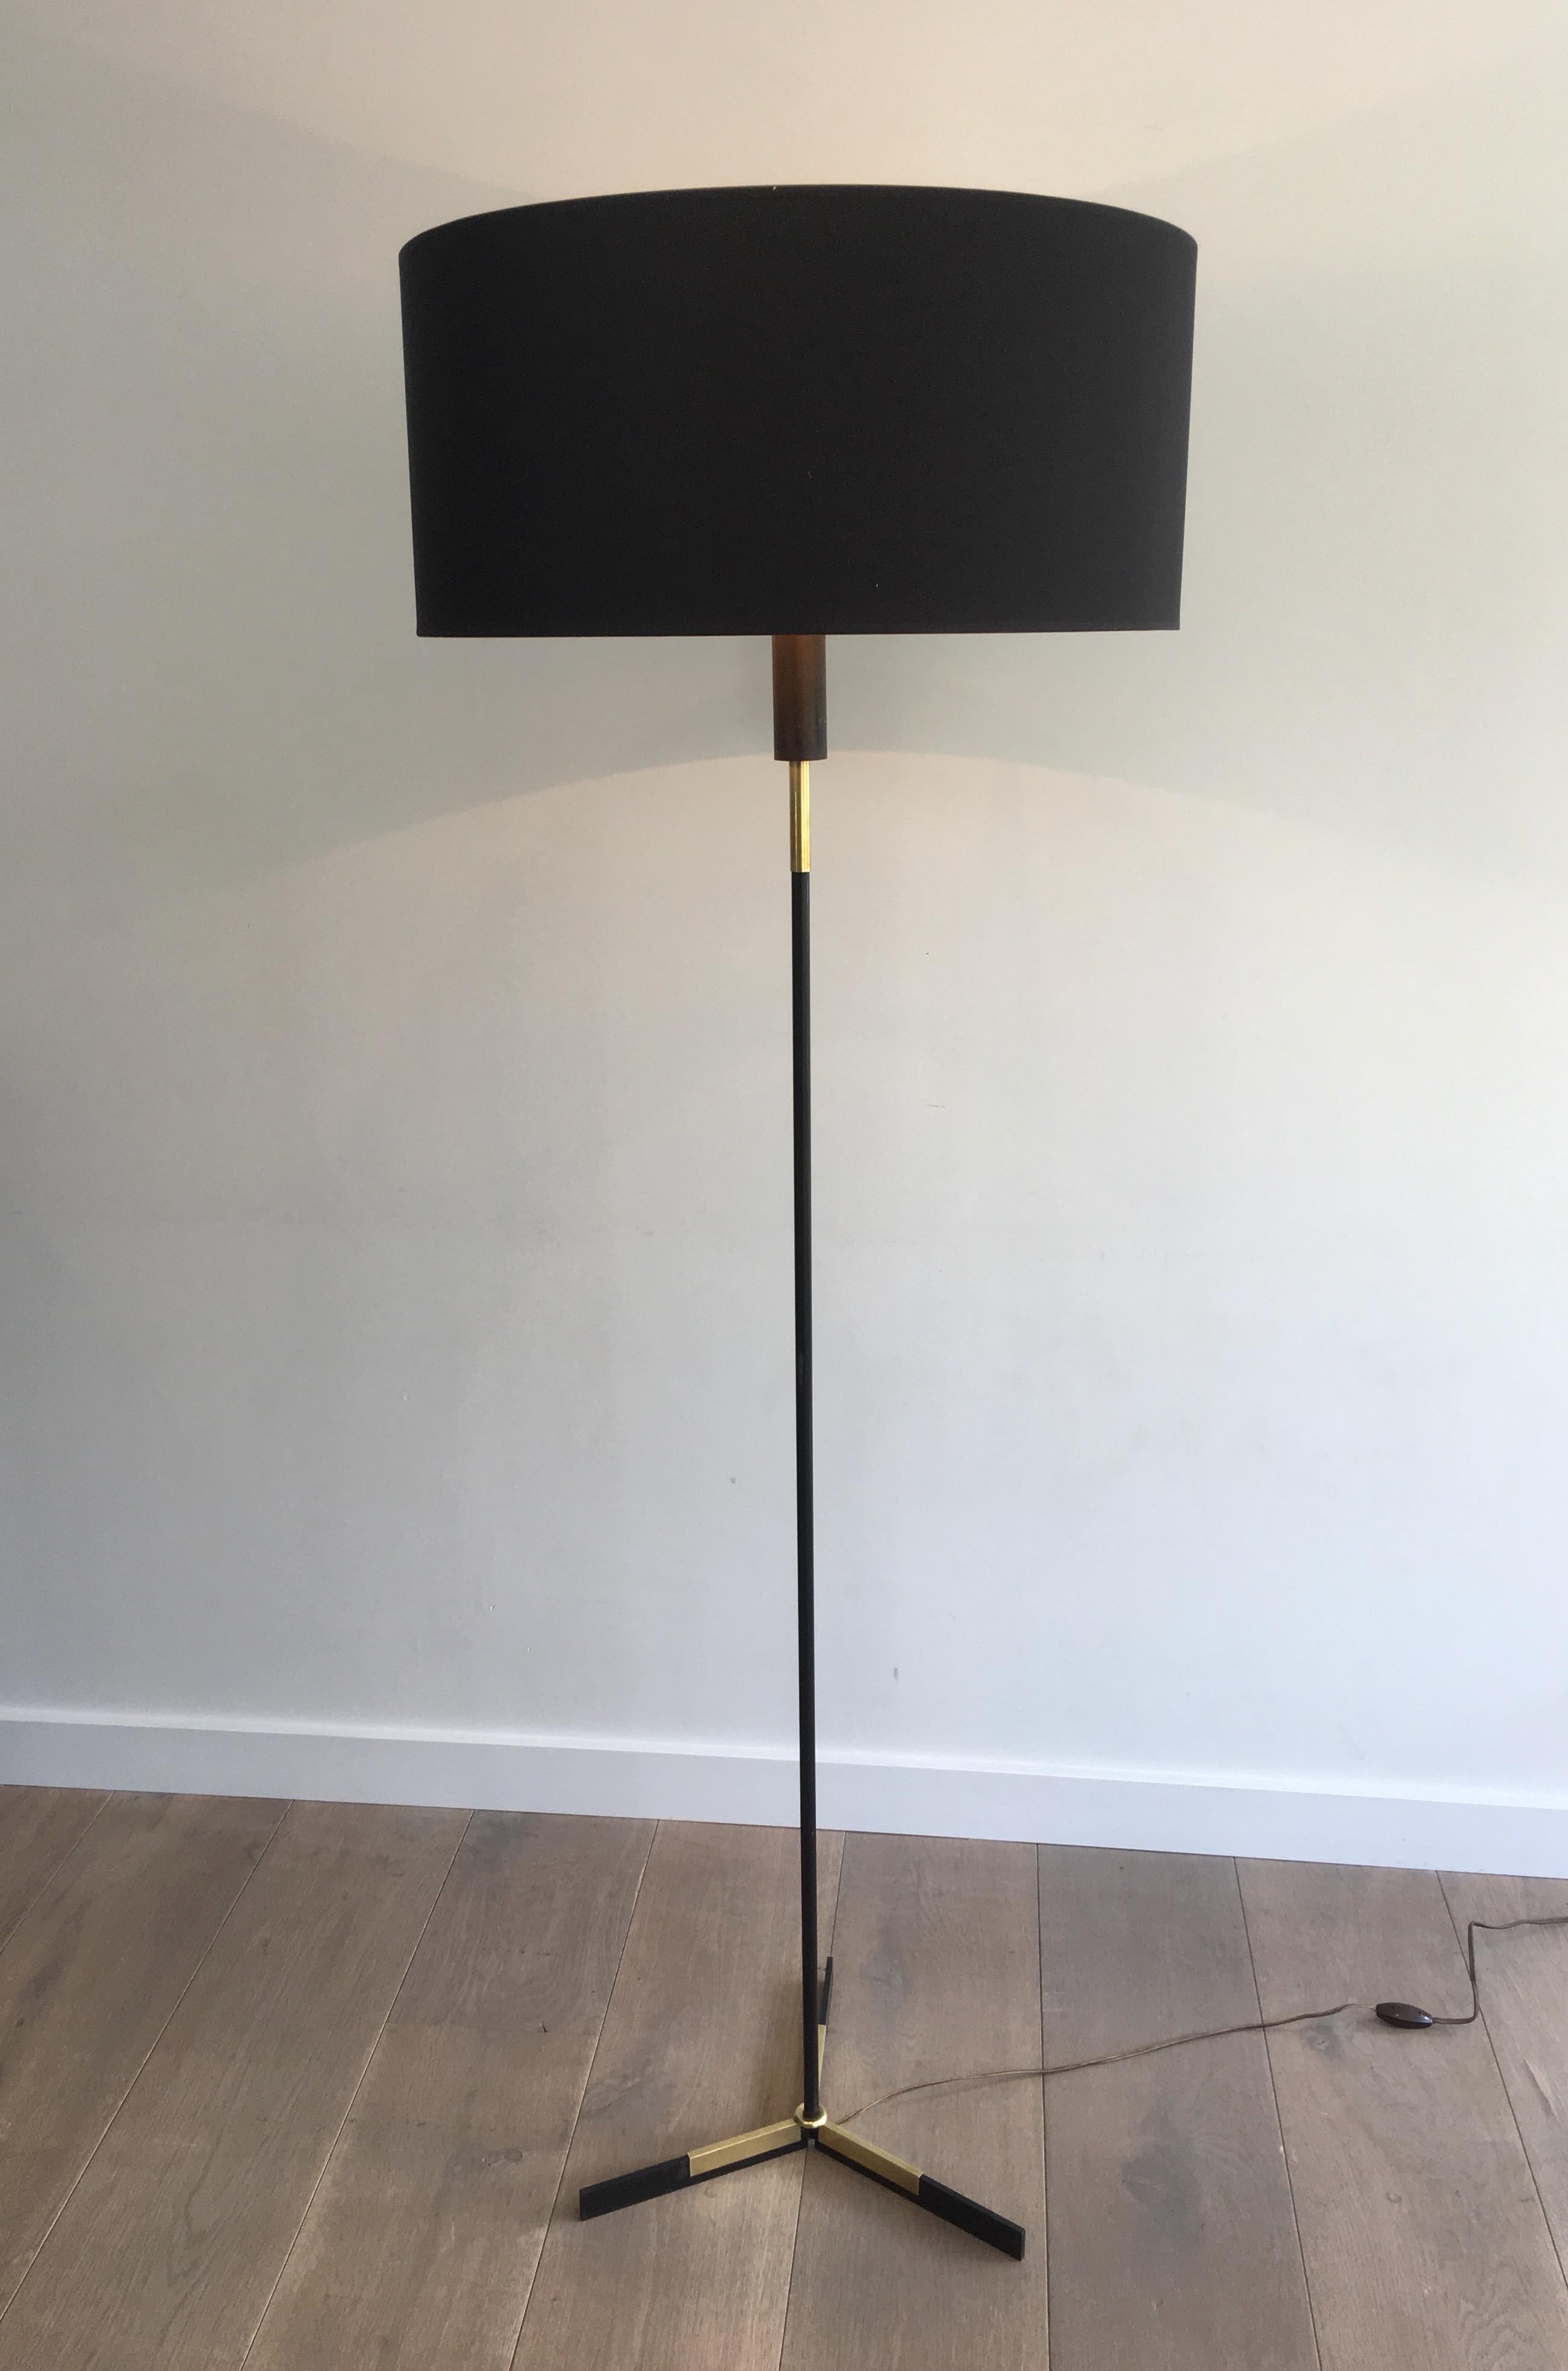 Mid-Century Modern Black Lacquered and Brass Design Floor Lamp, French, circa 1950 For Sale